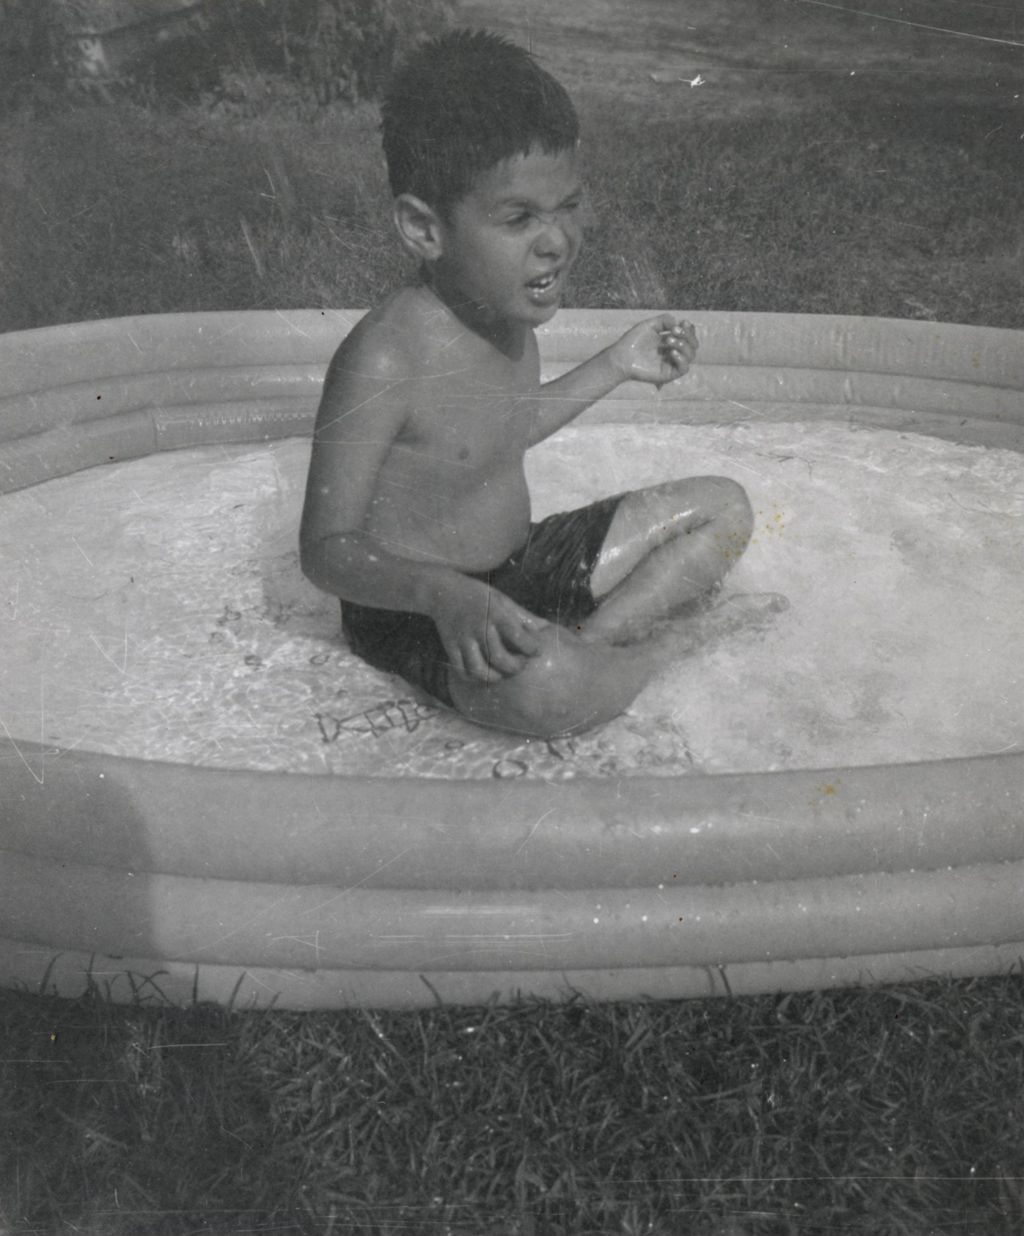 Boy in wading pool